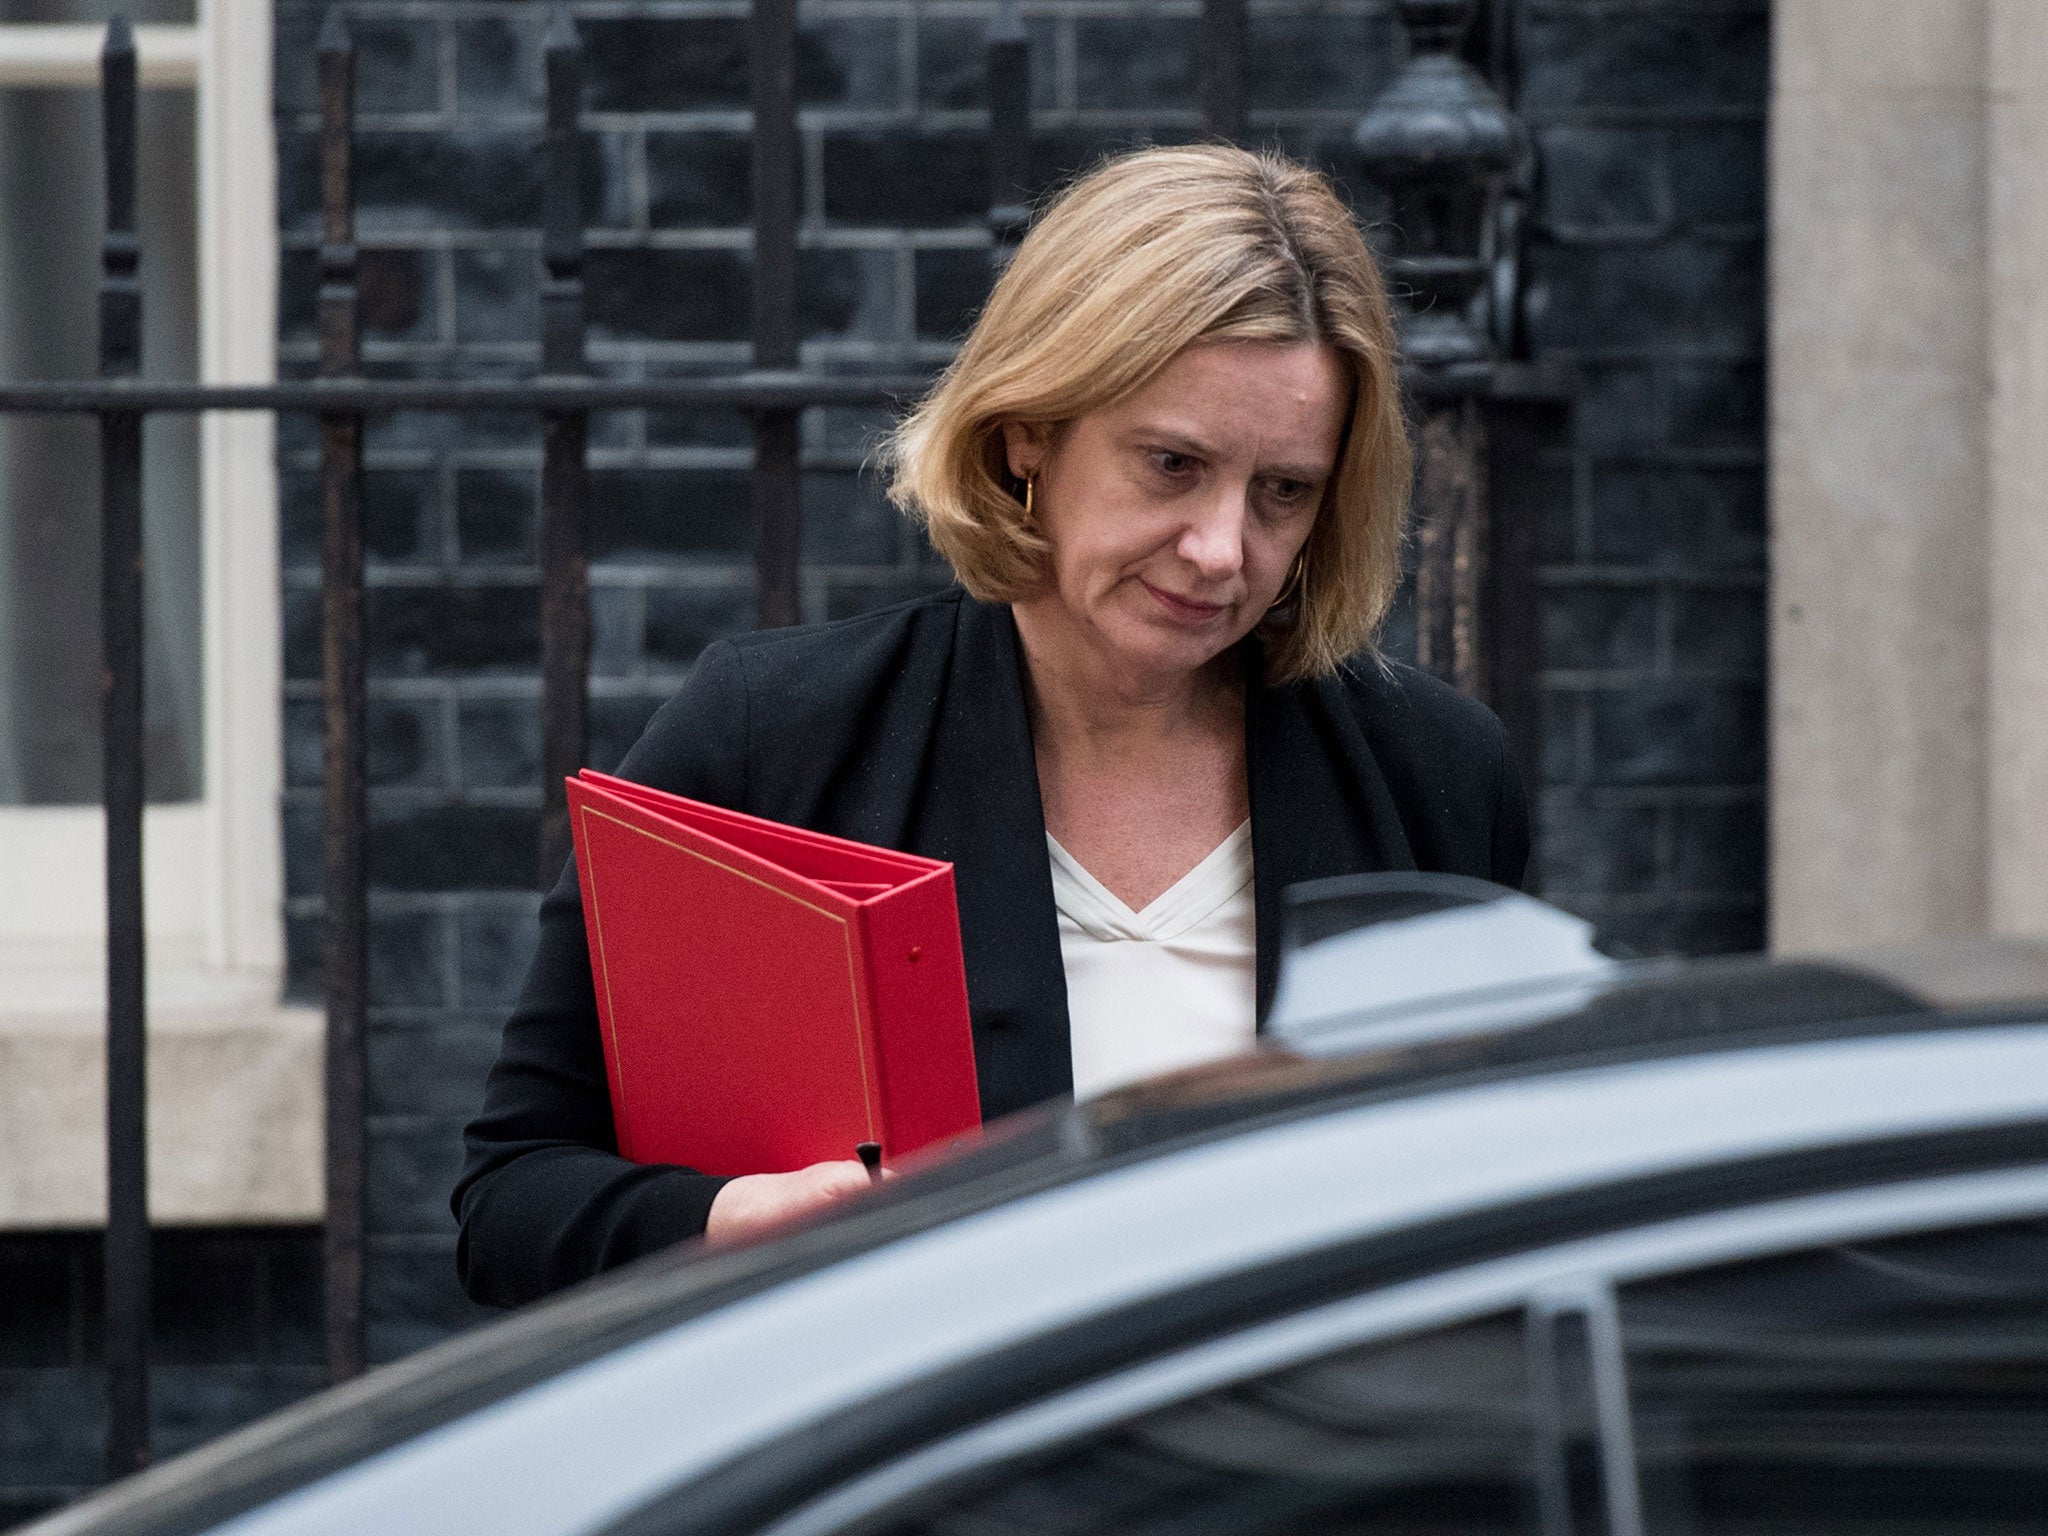 Amber Rudd has been under mounting pressure in recent days over the Windrush scandal